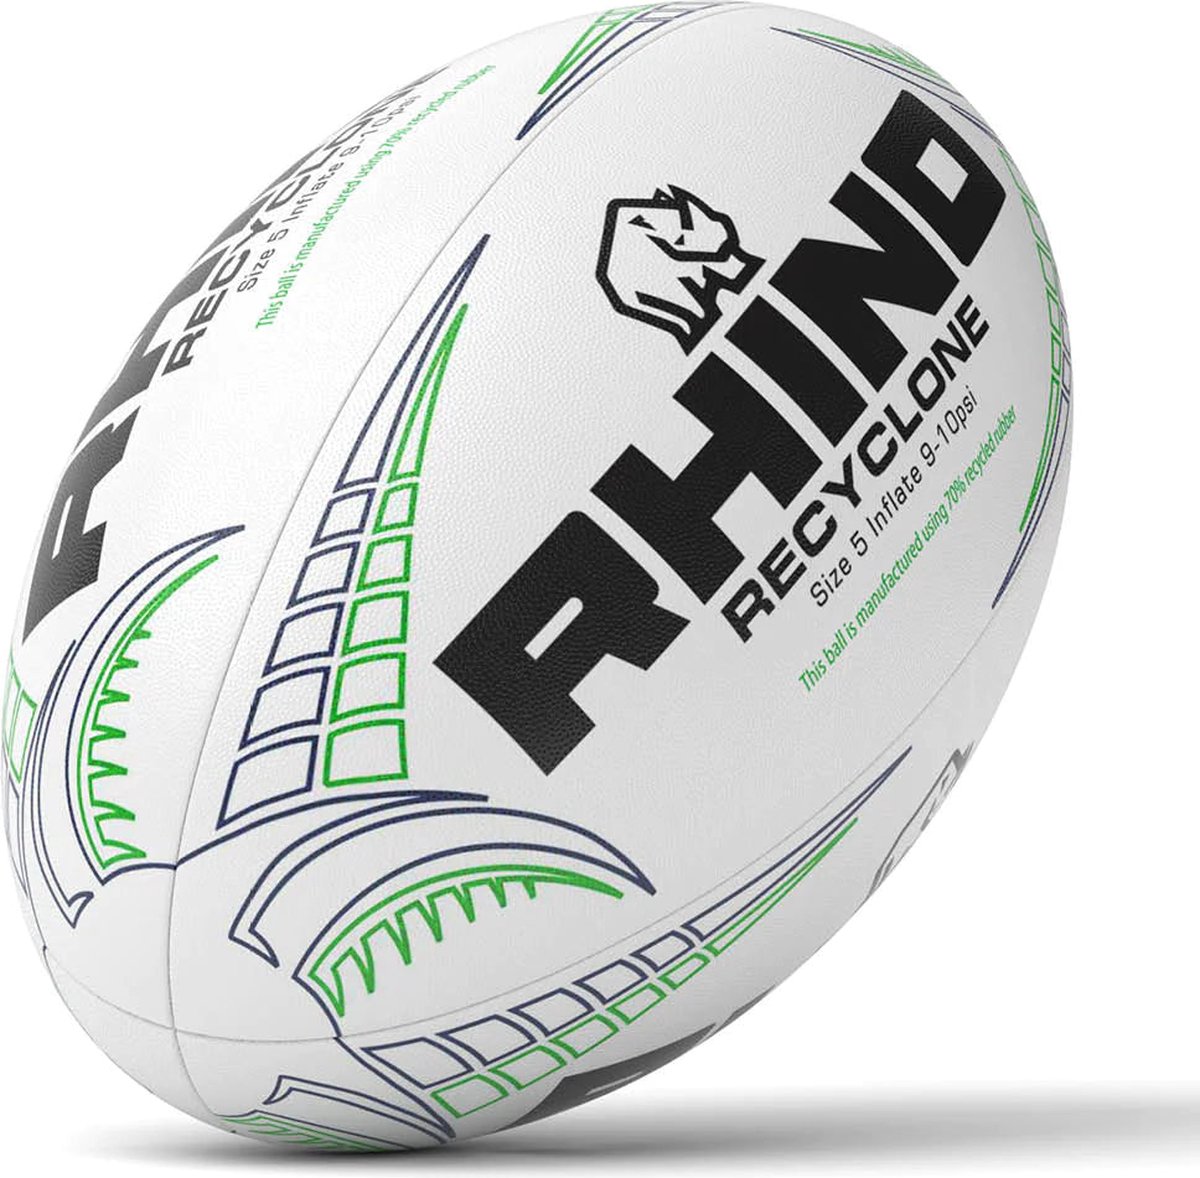 Rhino Recyclone Recycled Rugbybal Maat 3